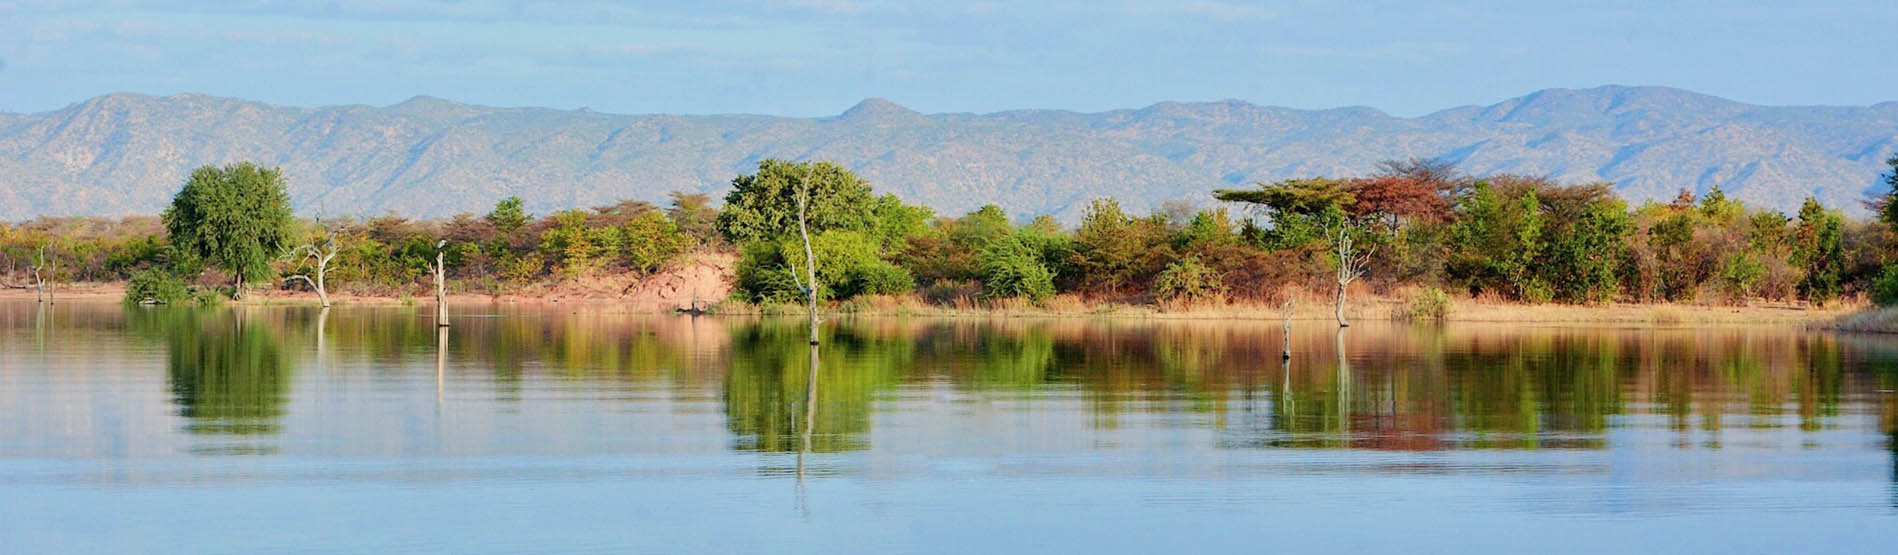 Image of a lake in Zambia with a view of mountains in the back